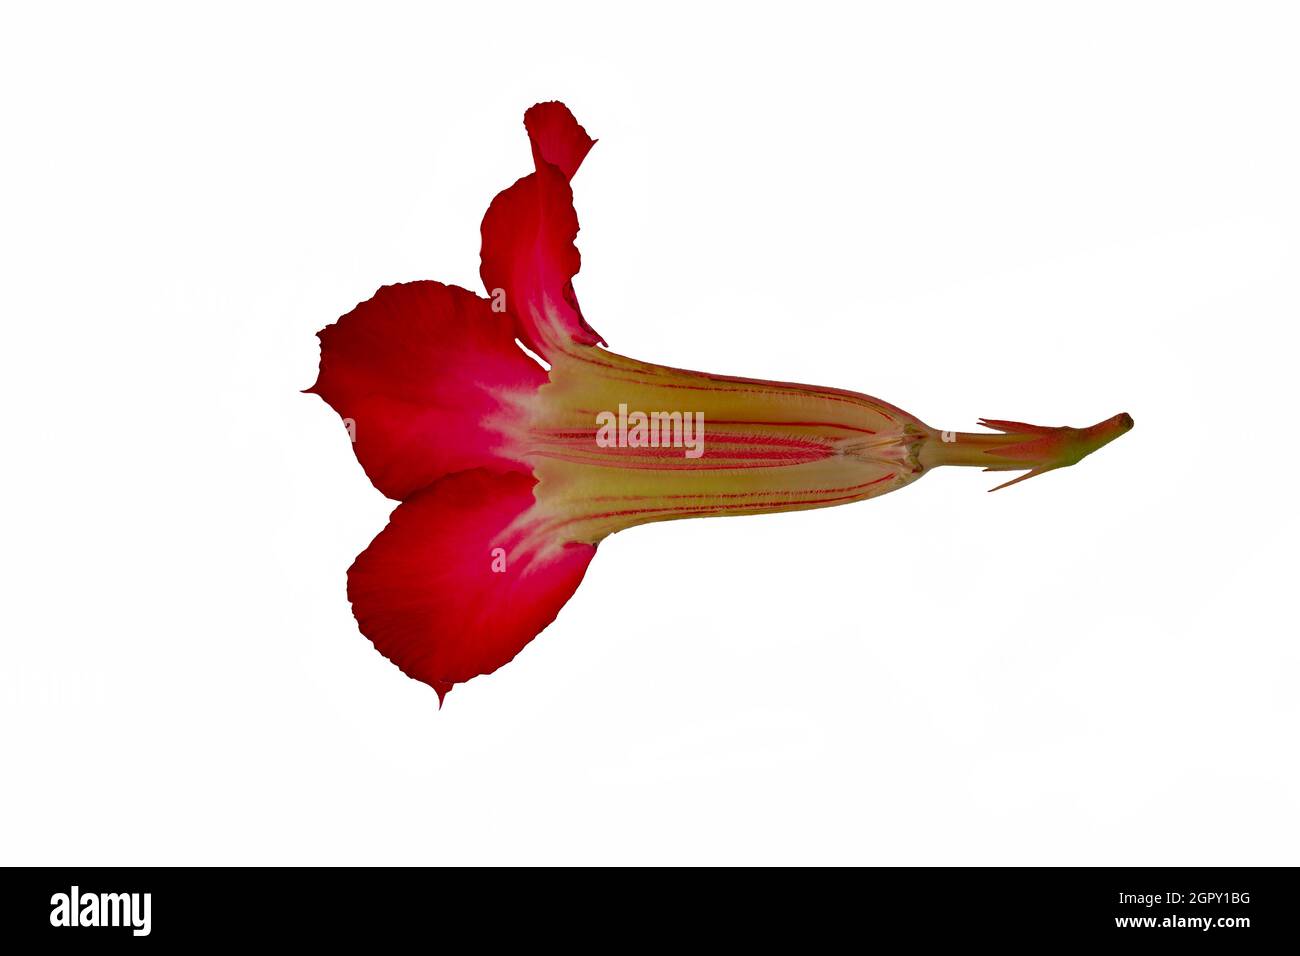 Japanese frangipani or adenium flowers are red, the inside of the flower is visible with a clipping path Stock Photo